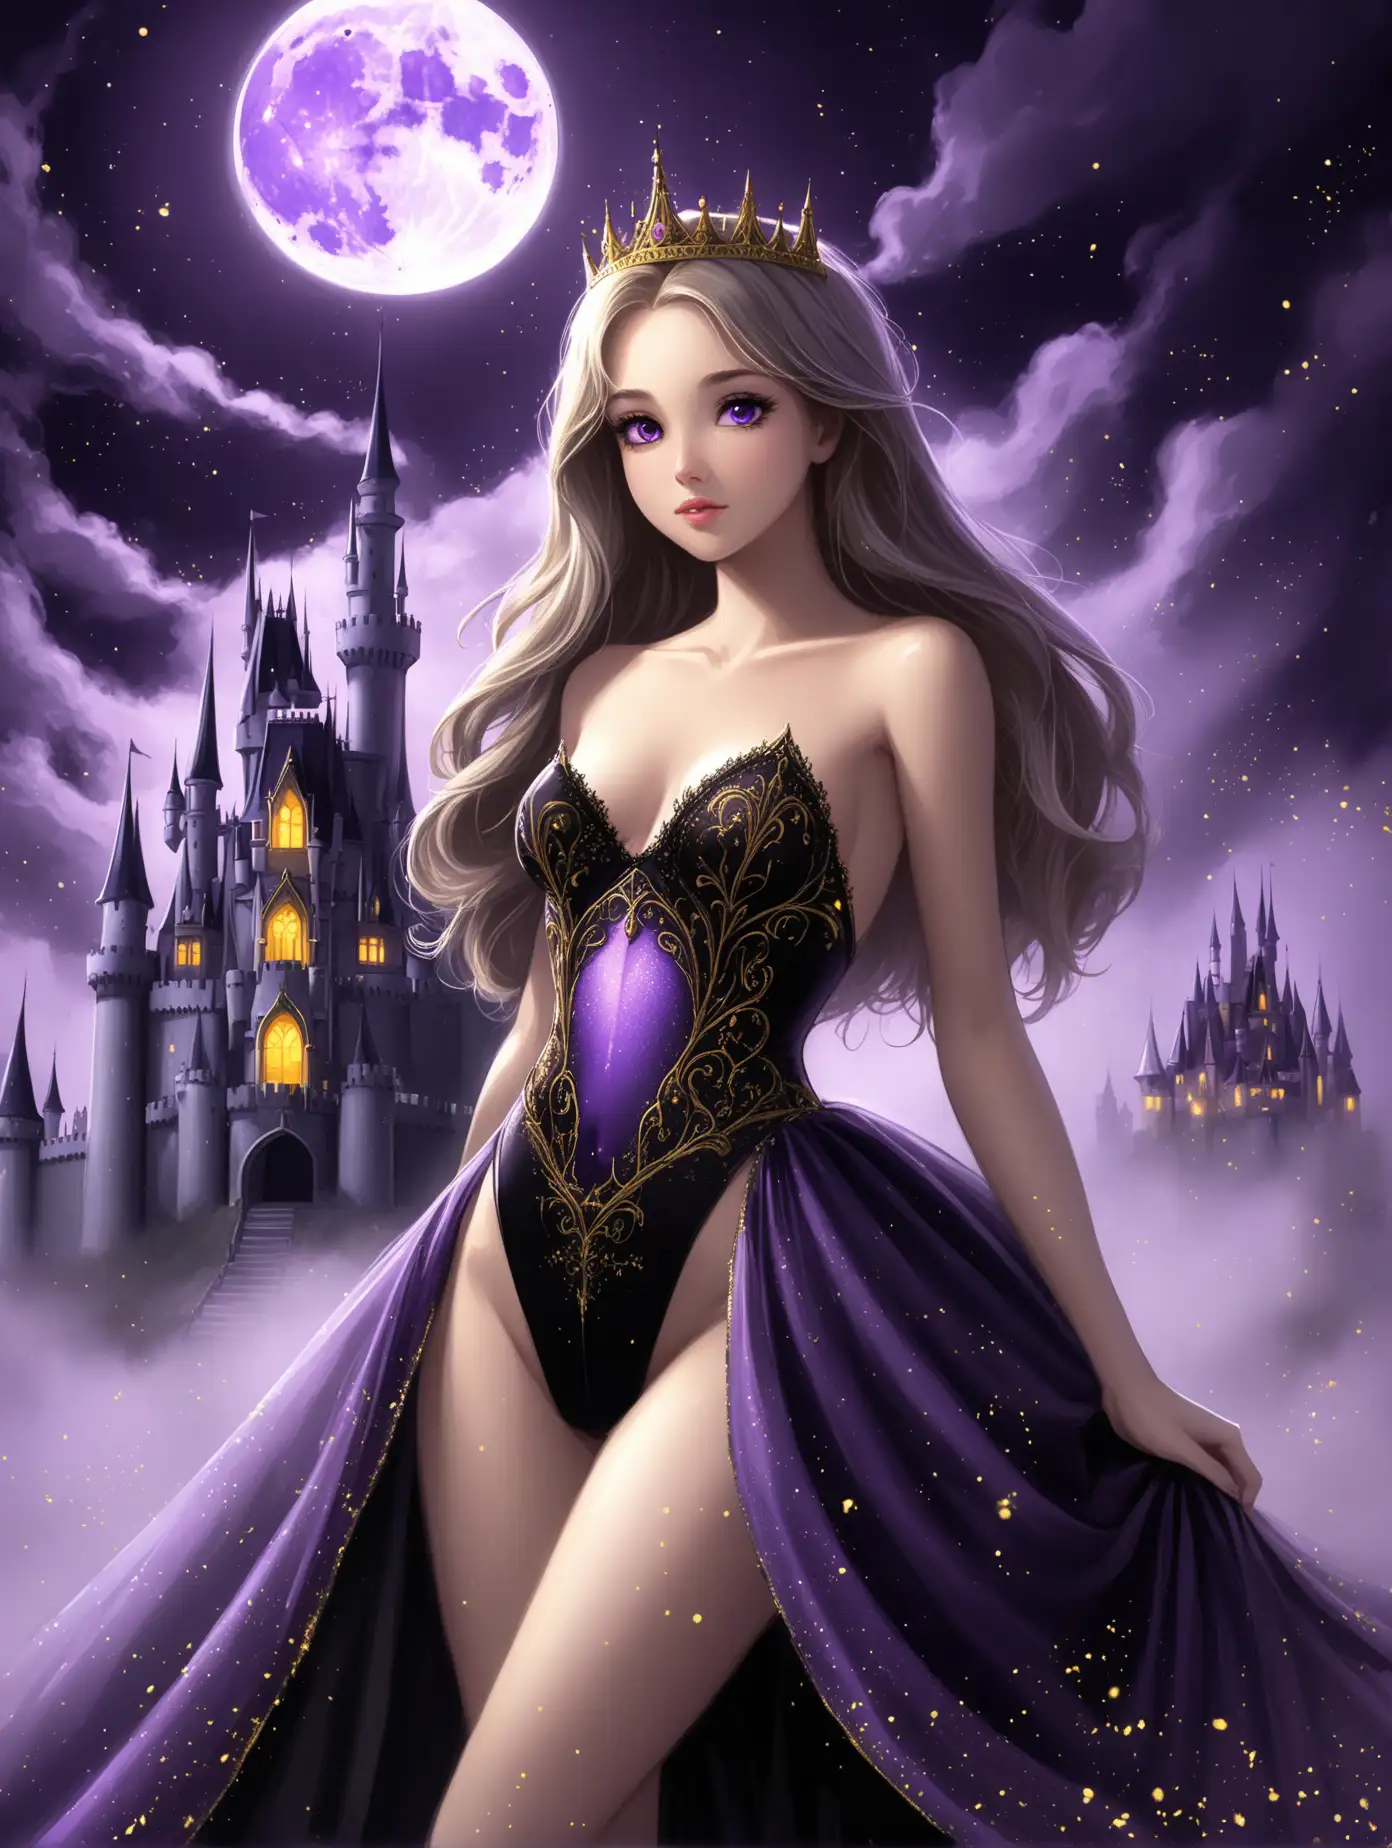 Enchanting Princess in Purple and Black Gown with Fairytale Castle Background